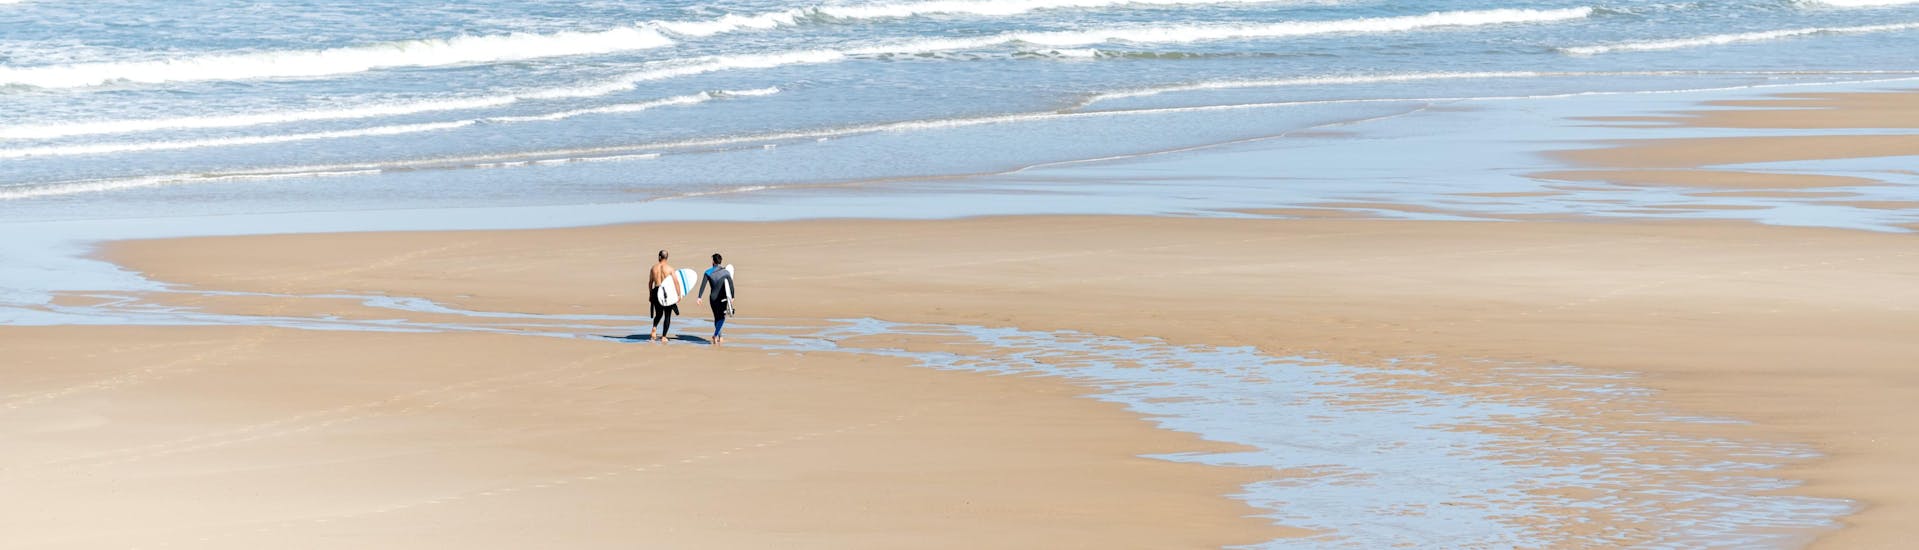 Two men are walking on the beach of Moliets-et-Maâ with their surfboard under their arm, where many surfing lessons take place.